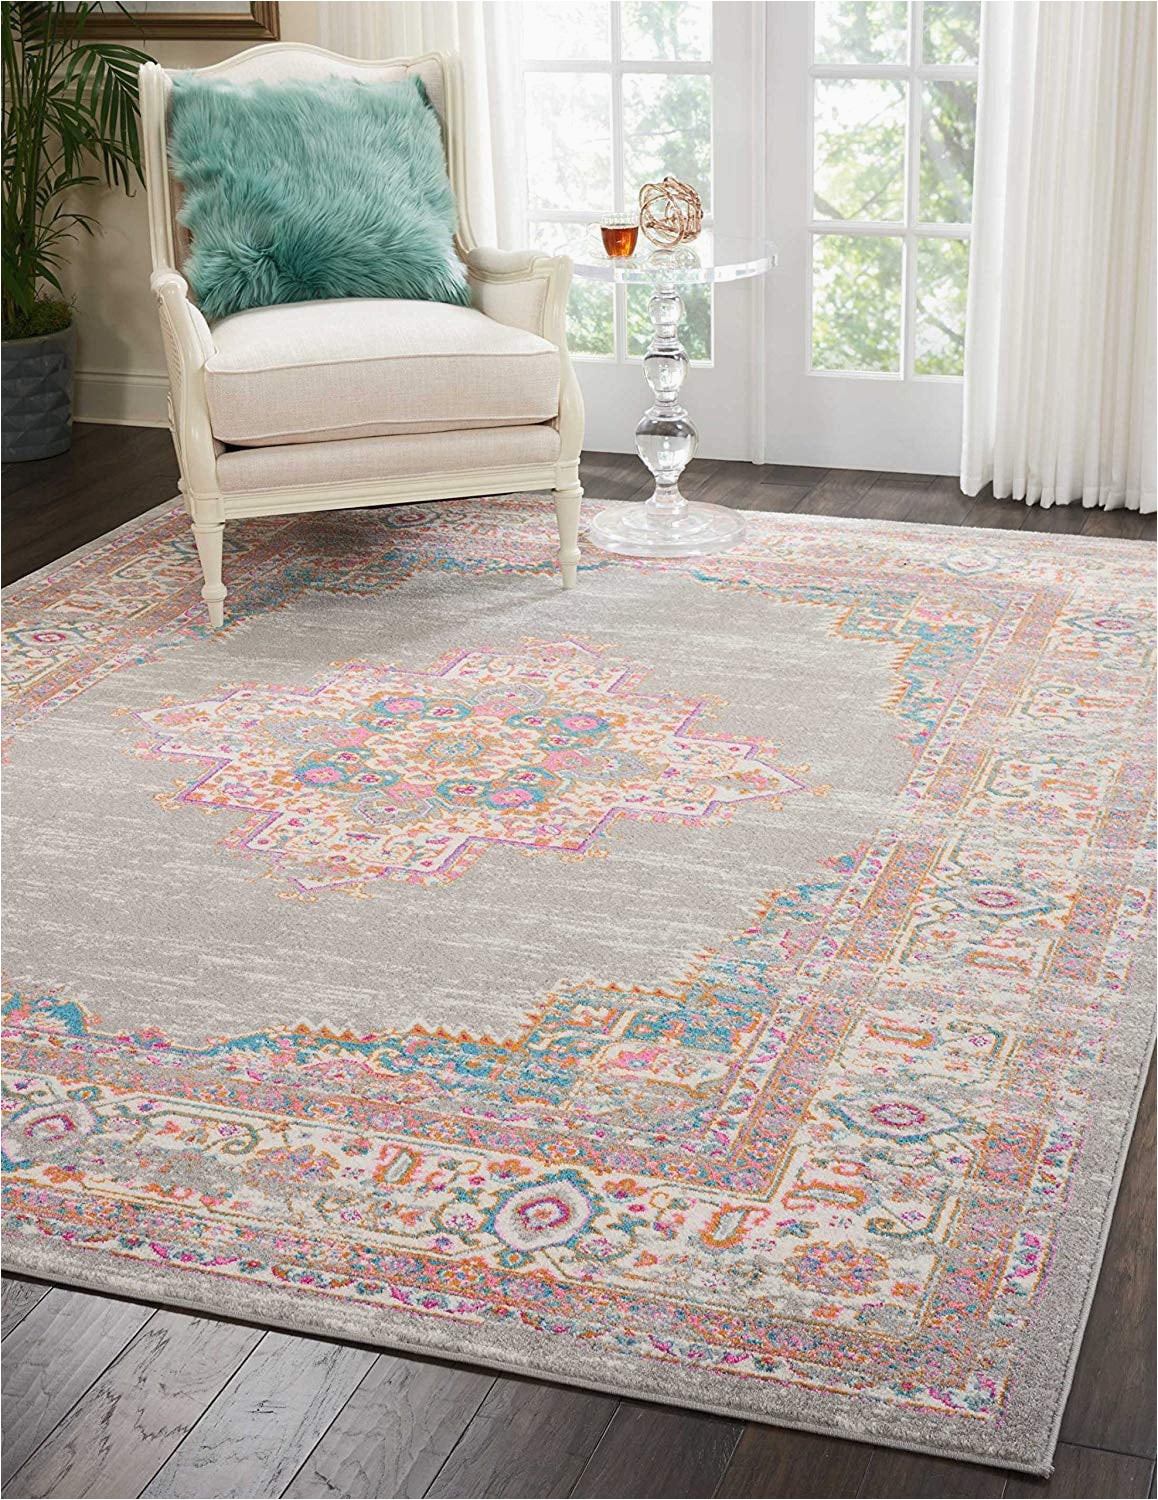 Cheap but Nice area Rugs Best Cheap area Rugs From Amazon